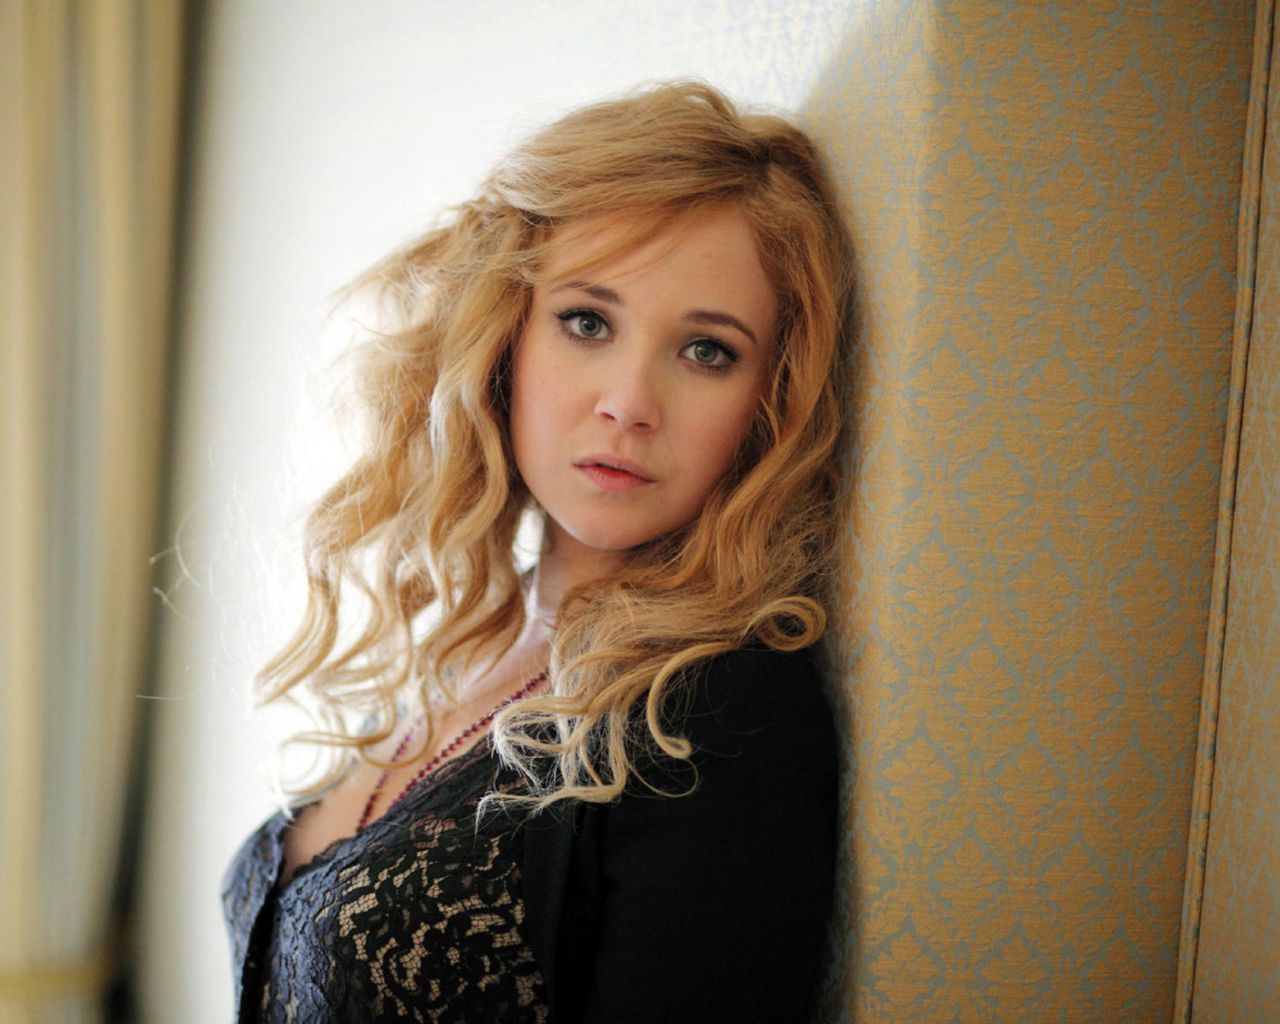 Juno Temple: celebrity is okay, privacy is better